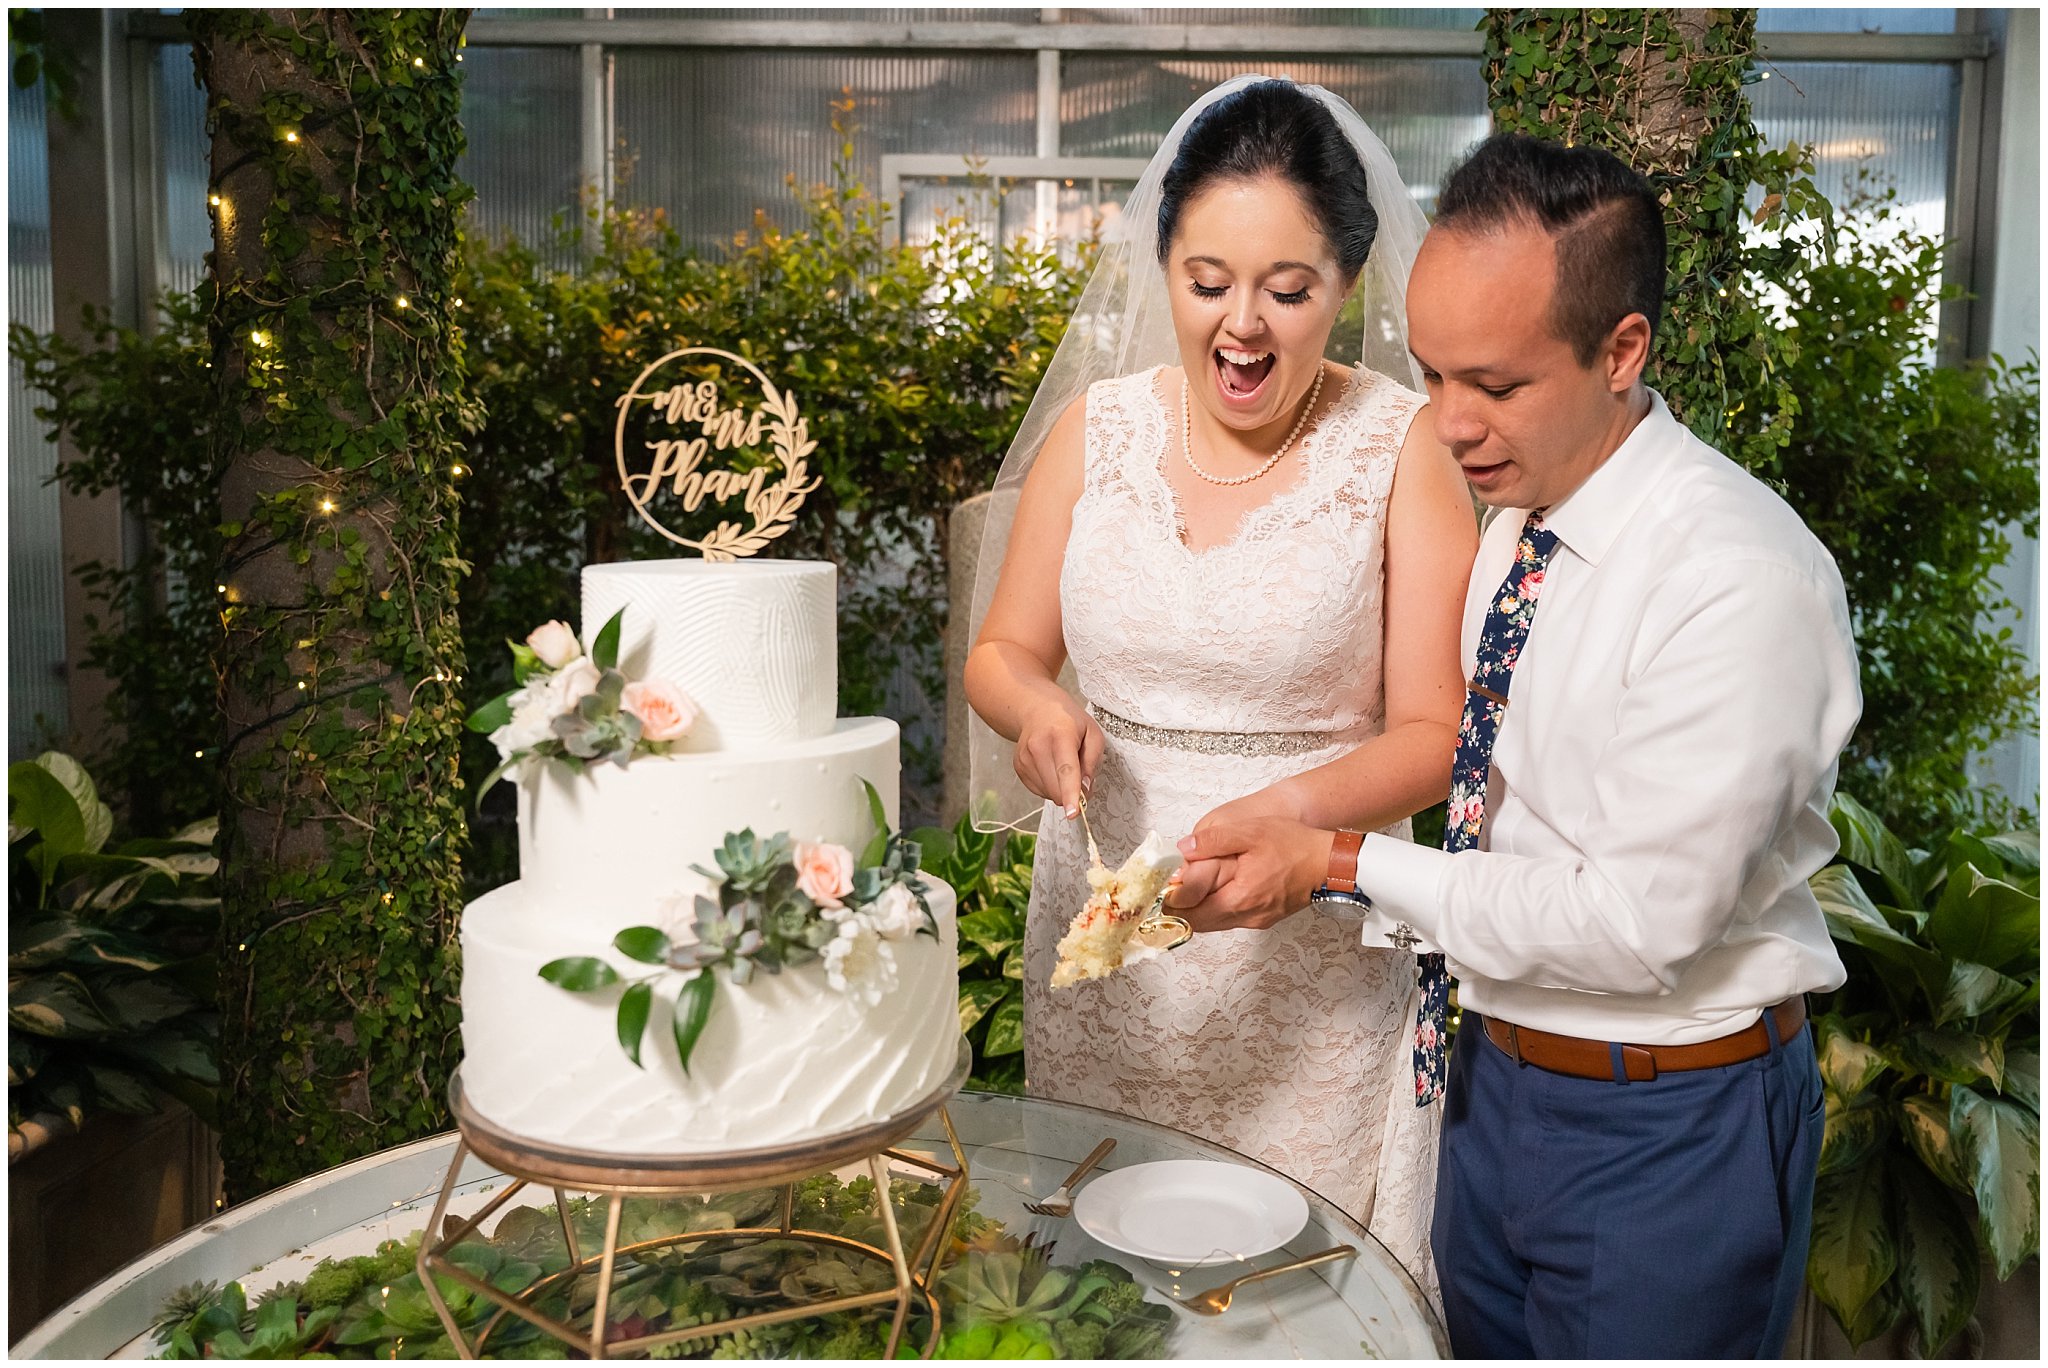 Floral cake and Greenhouse reception at Cactus and Tropicals | Cactus and Tropicals and Salt Lake Church Wedding | Jessie and Dallin Photography